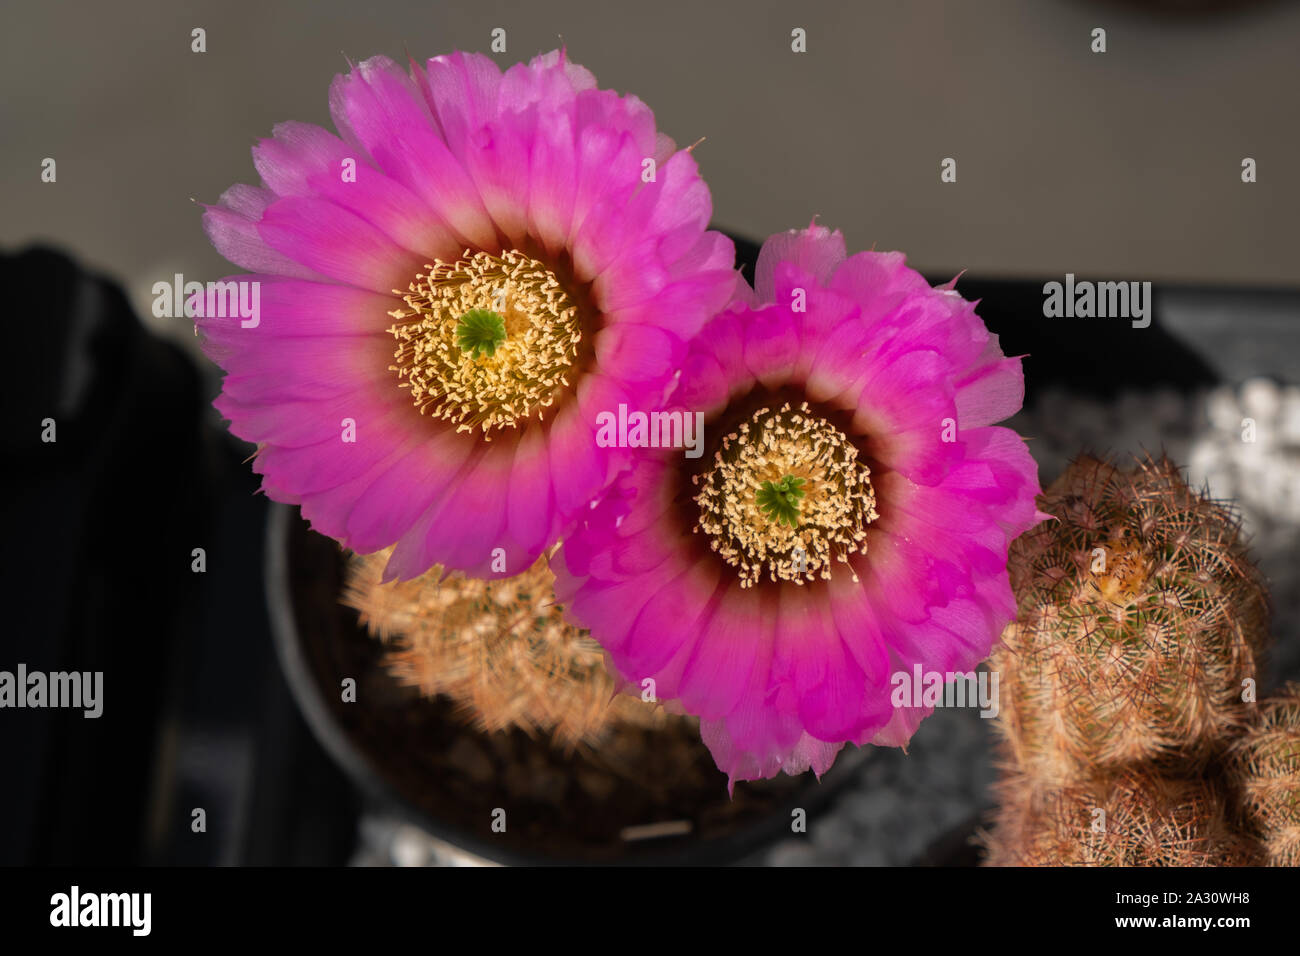 Close up of cactus (Echinocereus Reichenbachii) with two pink flowers in a flowerpot Stock Photo